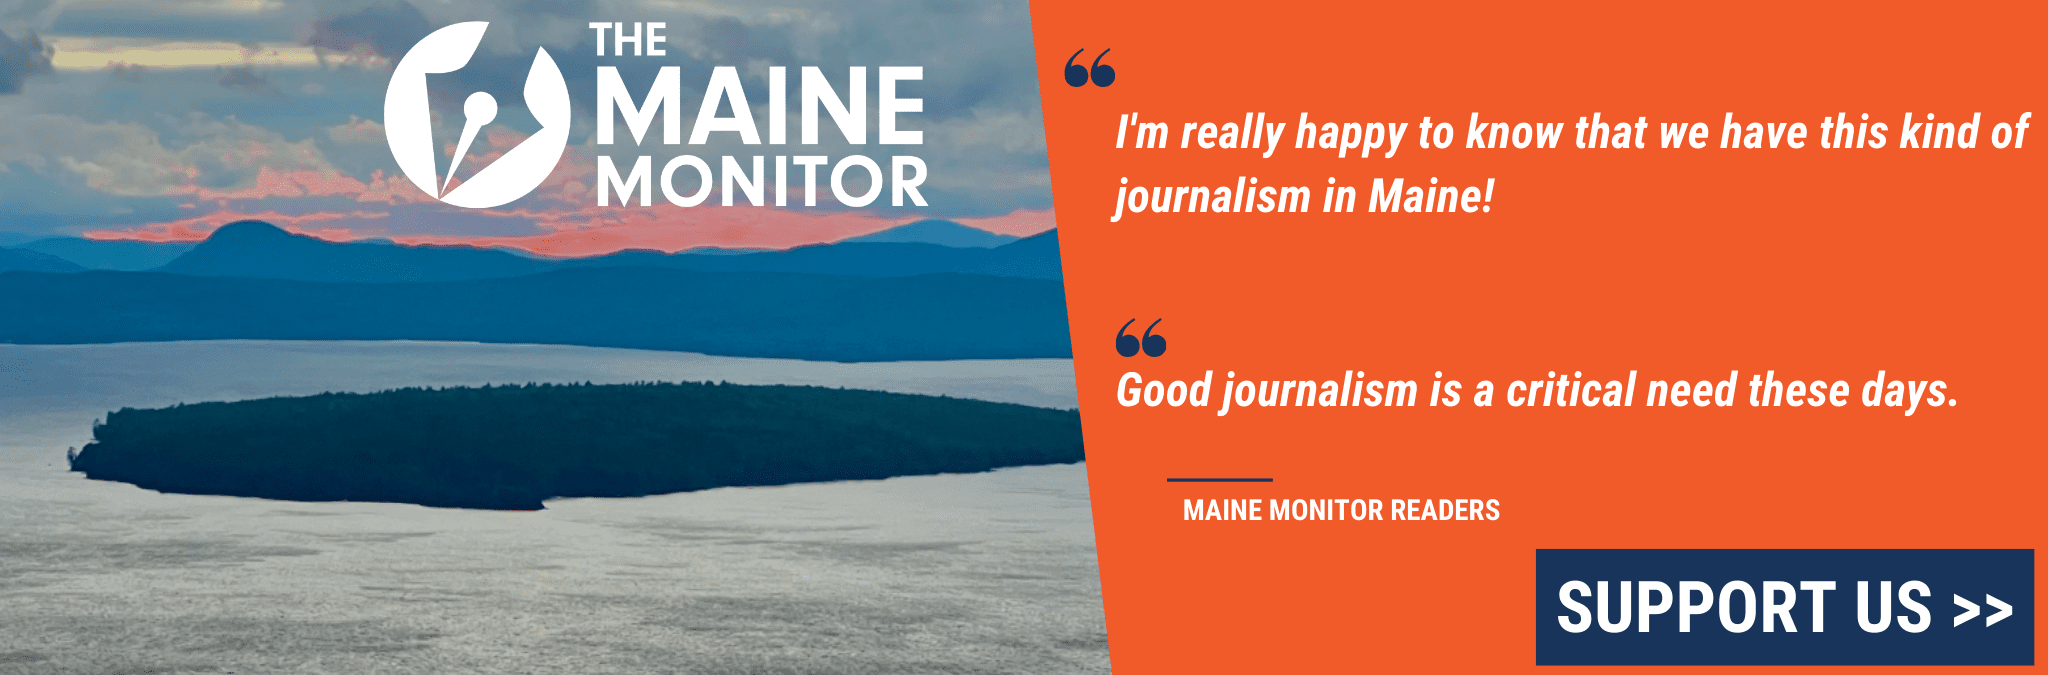 A graphic seeking donations. A quote from two Maine Monitor readers. The first says 